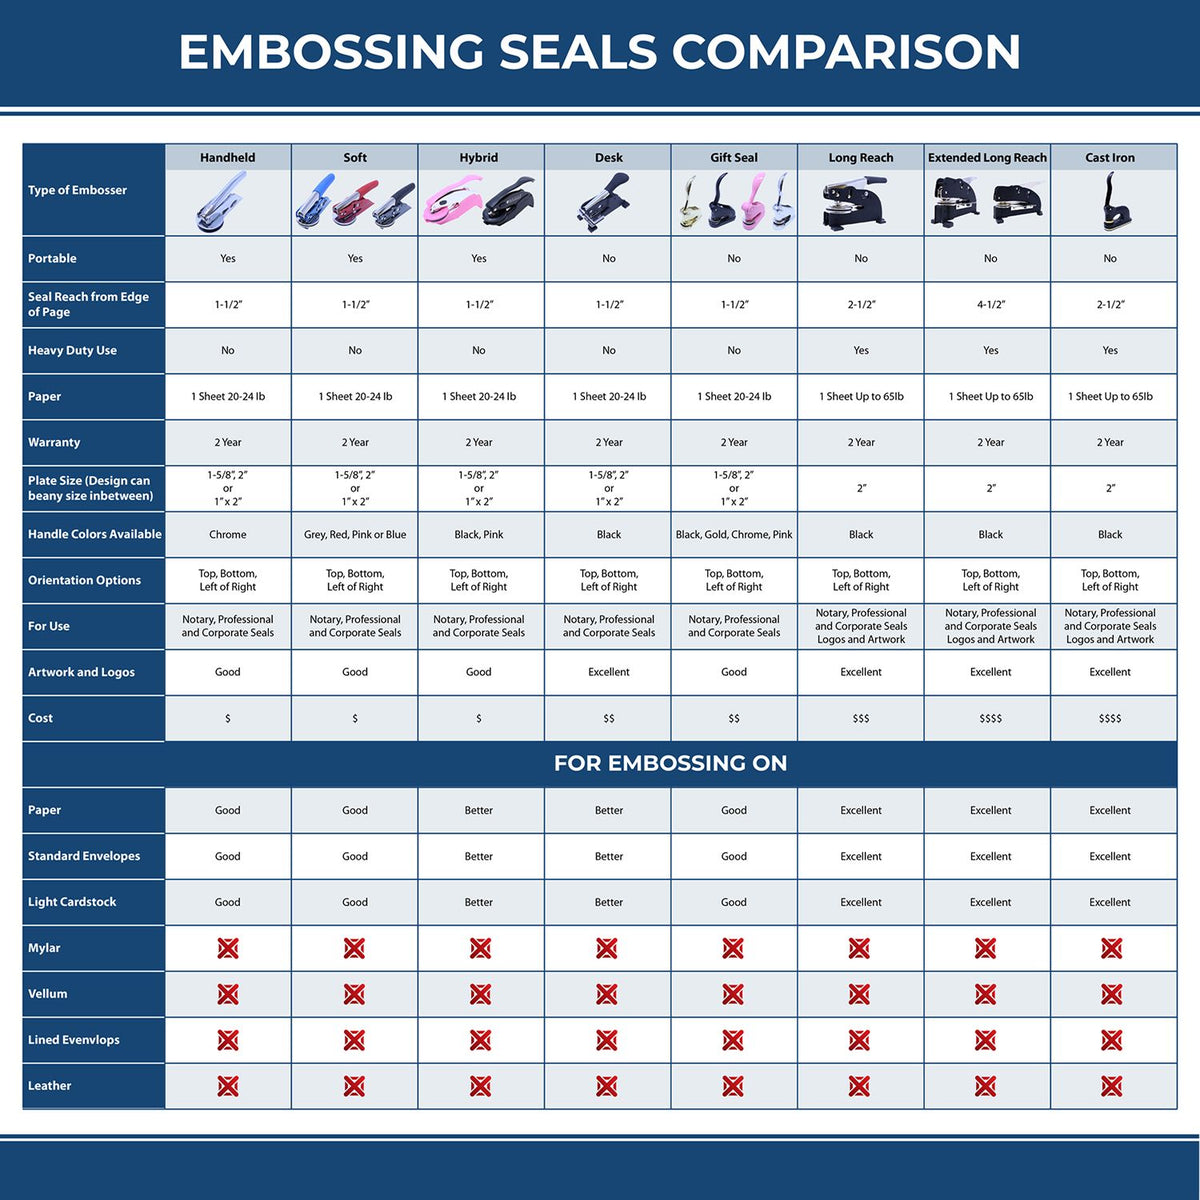 A comparison chart for the different types of mount models available for the Hybrid Connecticut Geologist Seal